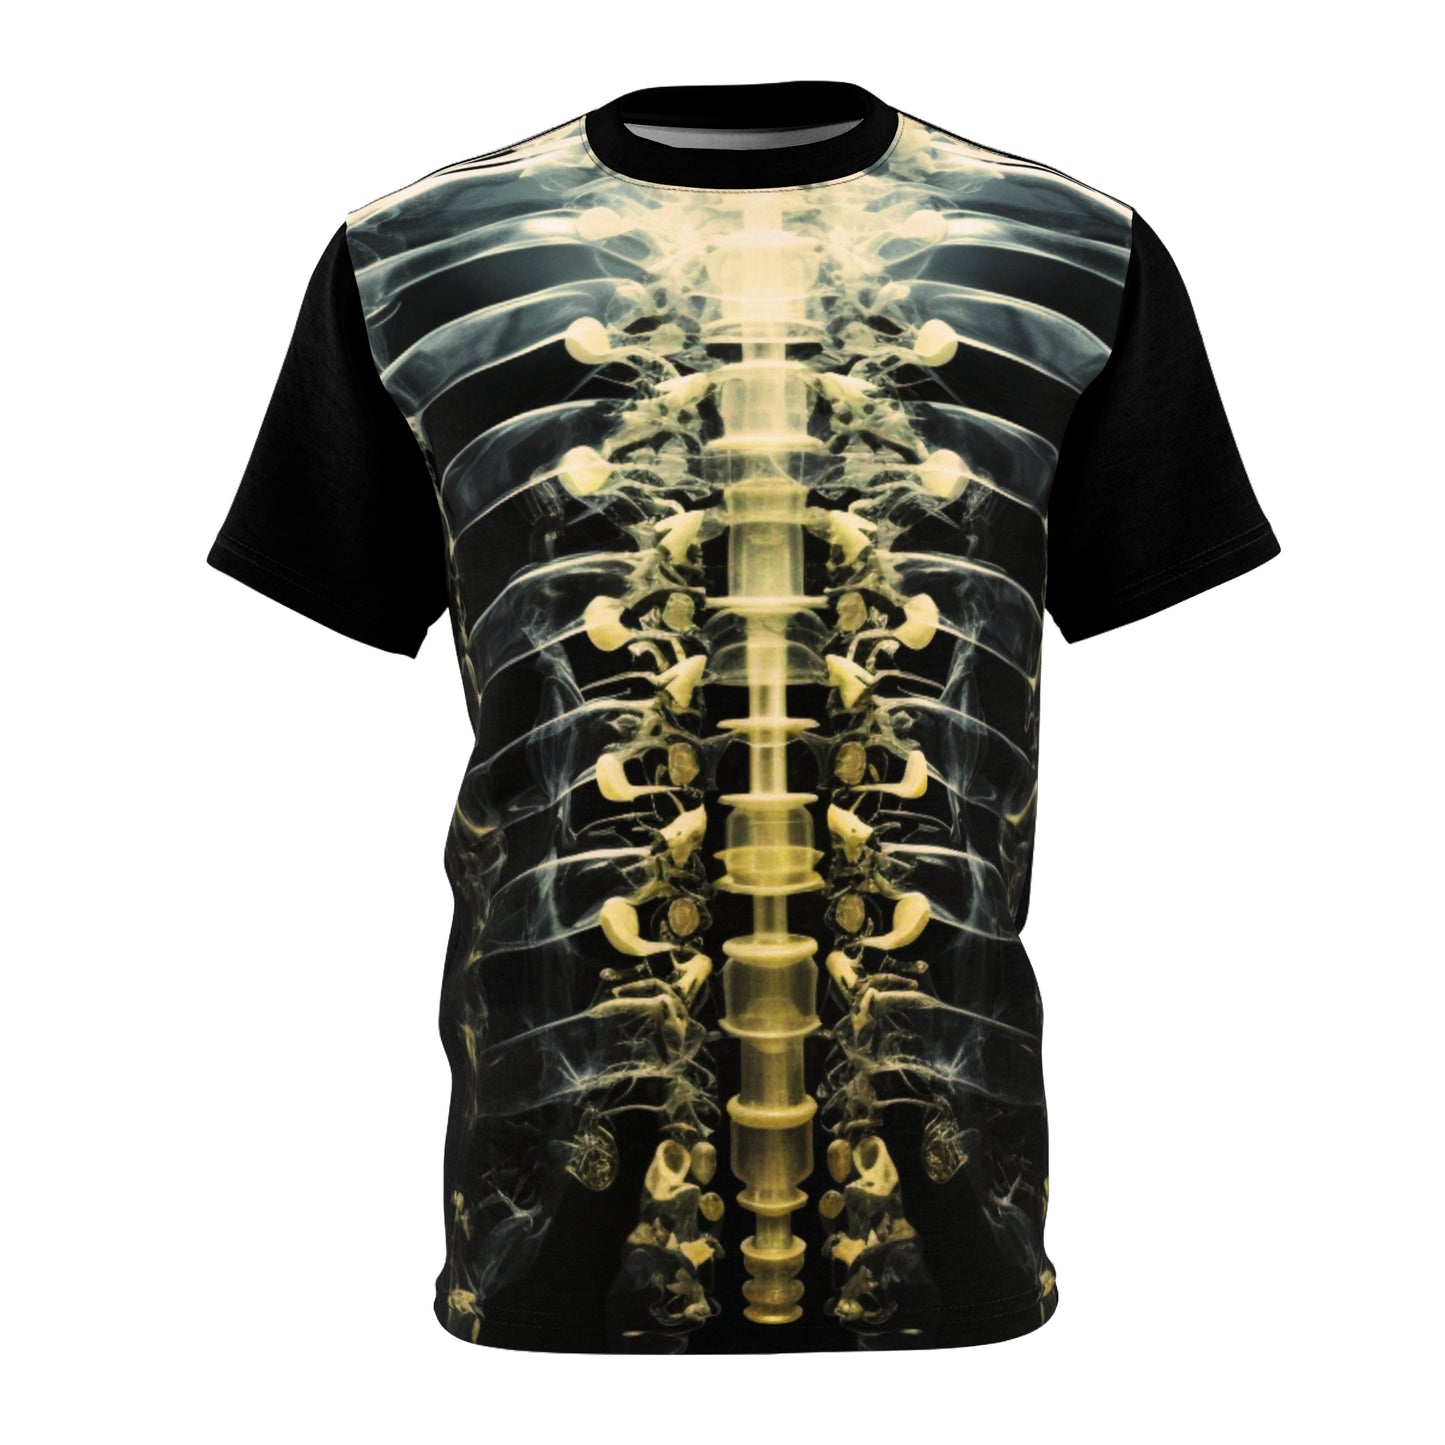 Wear Art with Our Torsion Human Body X-Ray All Over Print T-Shirt - Unique and Strikingly Detailed Design for Medical and Art Enthusiasts All Over Prints   